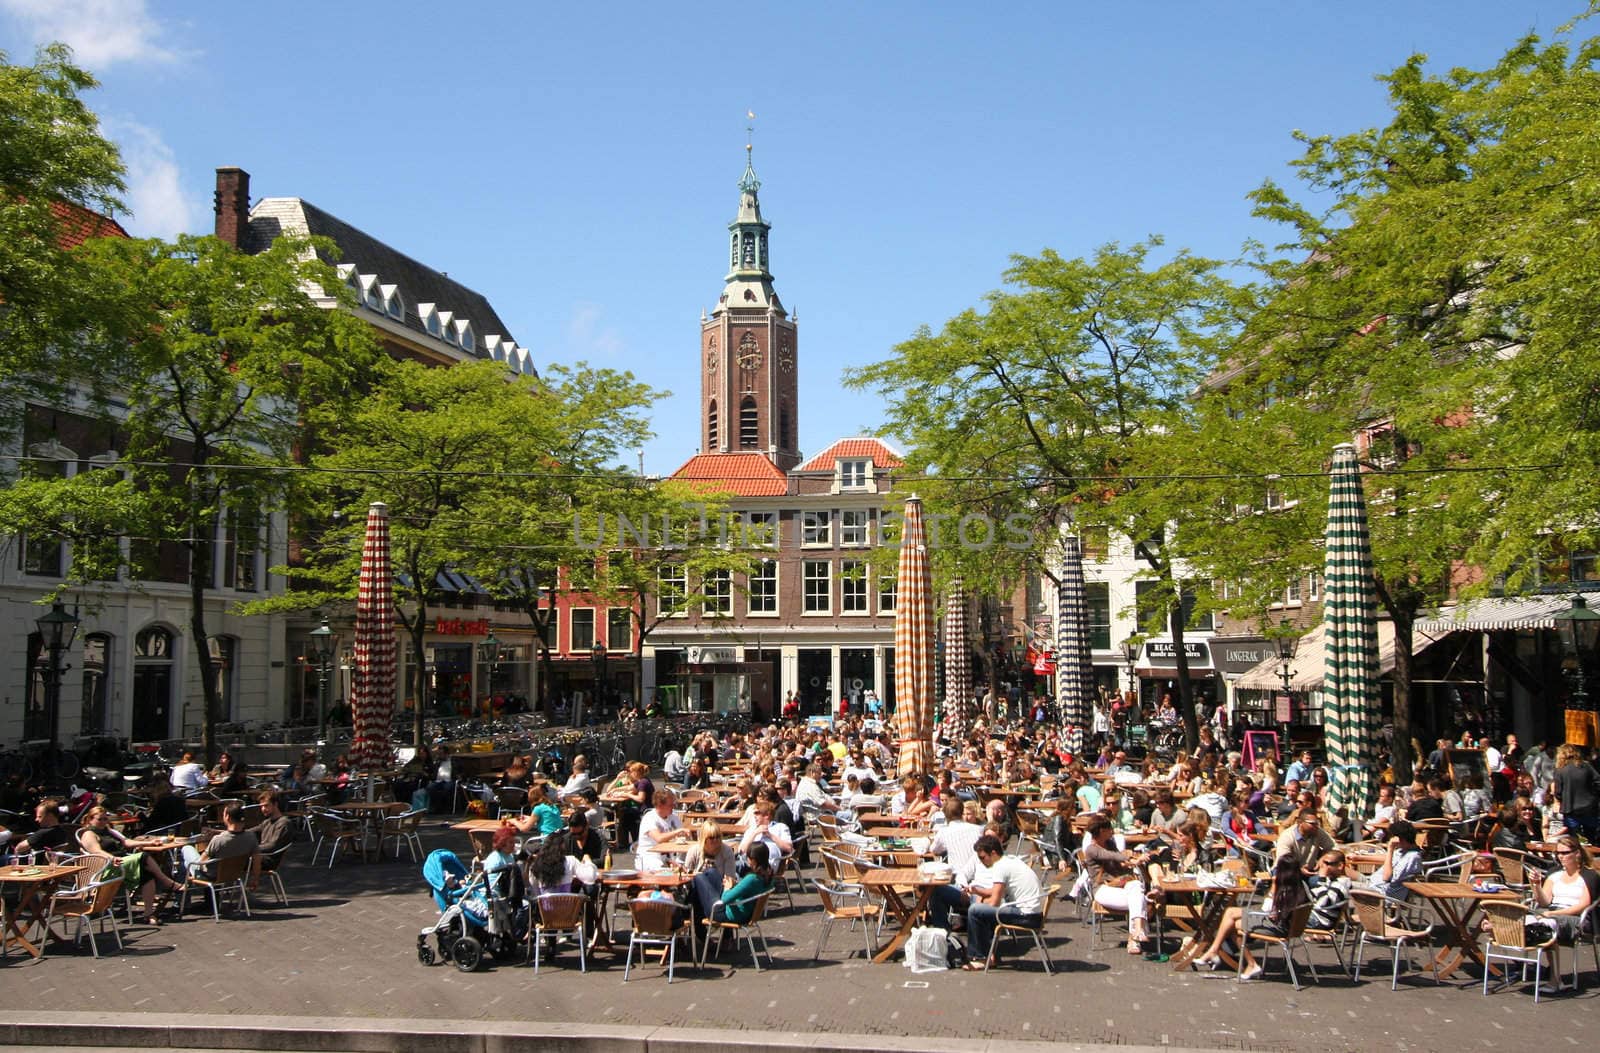 People sitting outside a cafe in The Hague, Holland